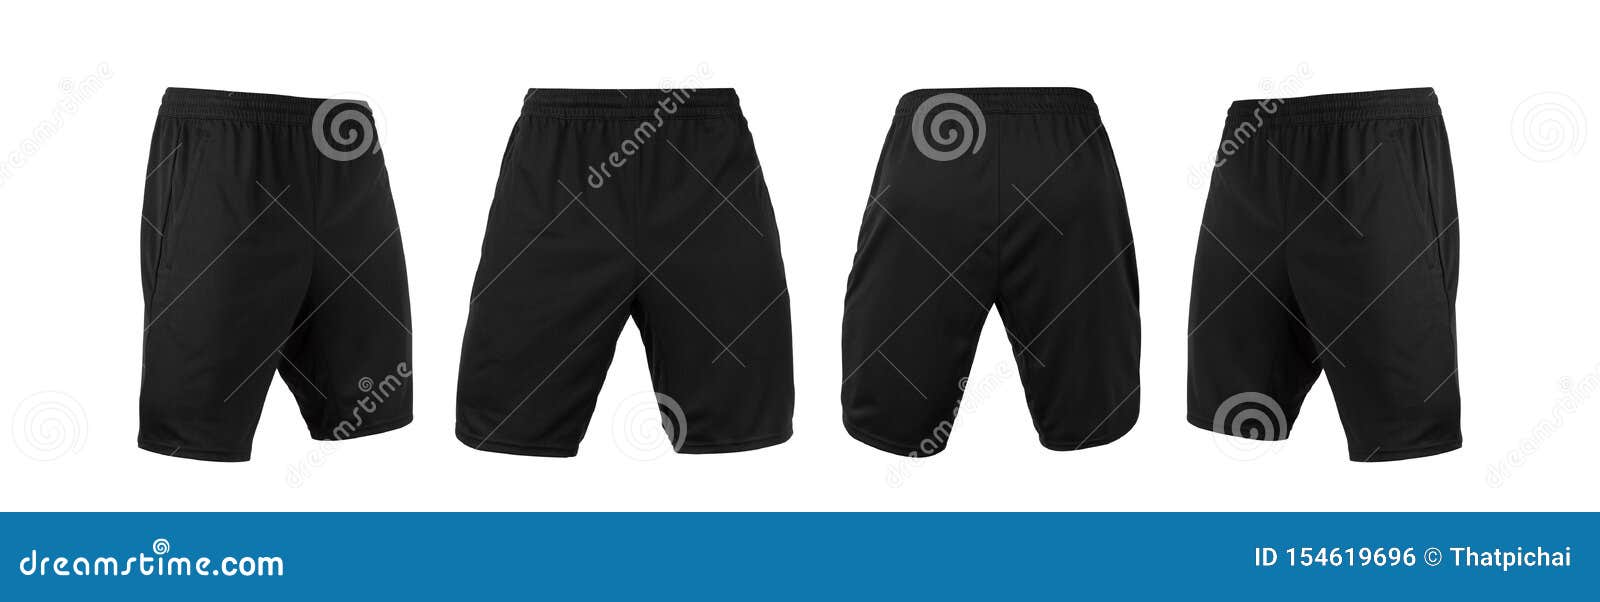 Download Blank Black Shorts Pant Mock Up Template, Front And Back ...